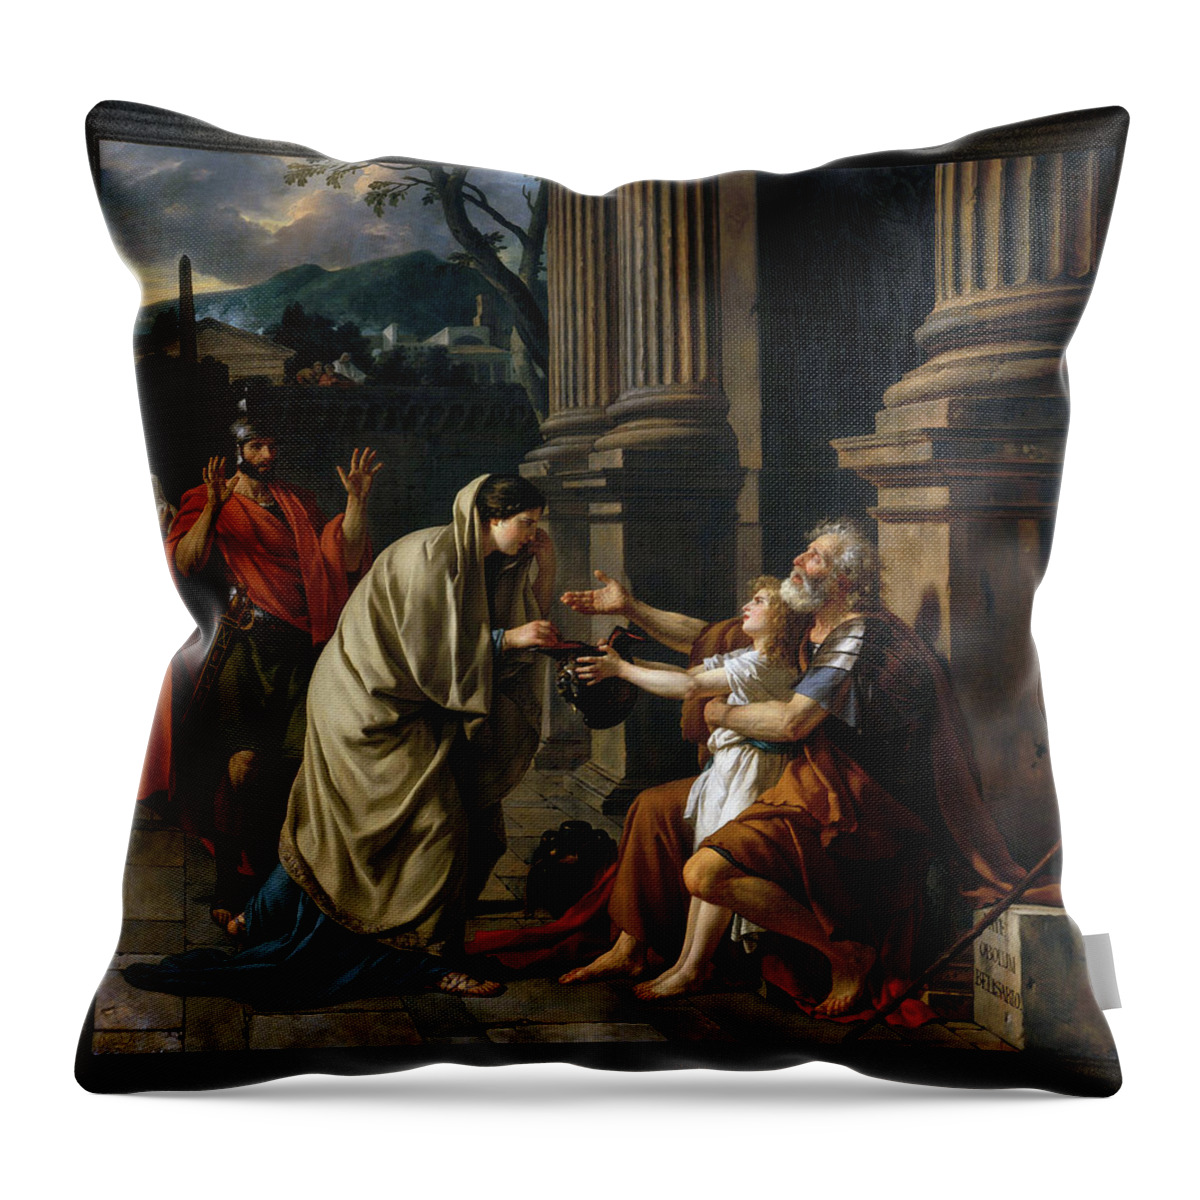 Belisarius Throw Pillow featuring the painting Belisarius by Jacques Louis David by Rolando Burbon